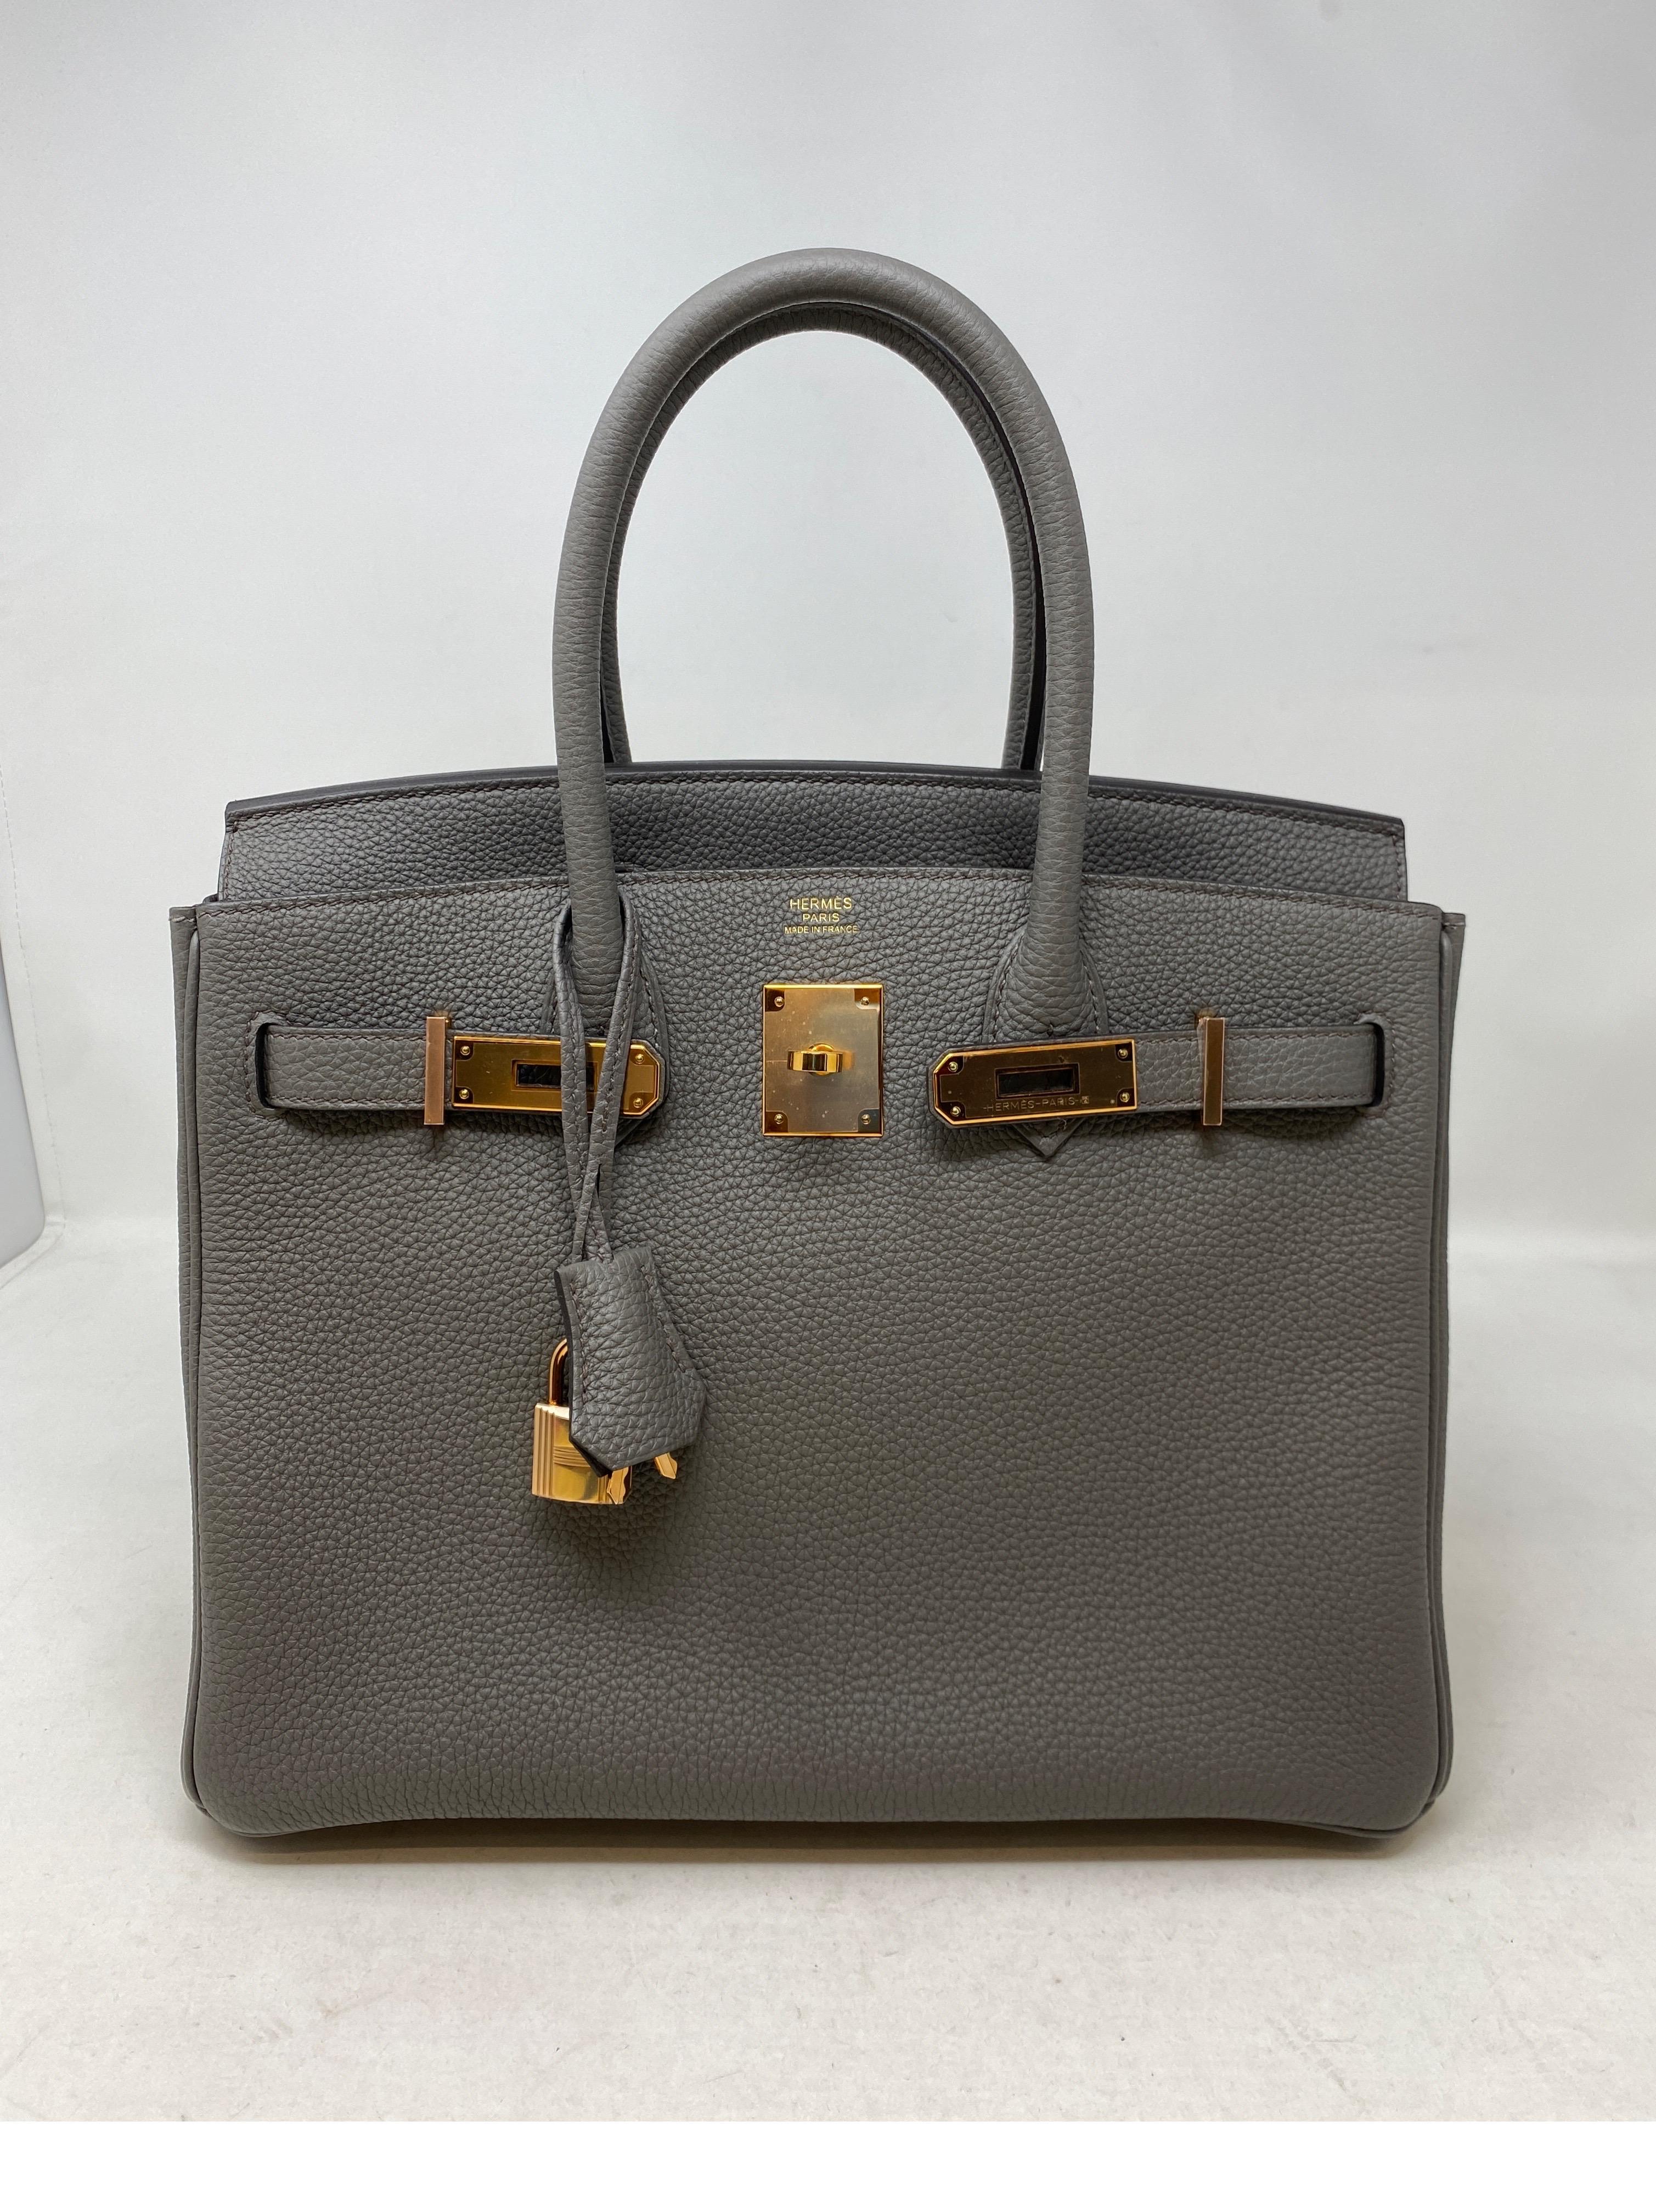 Hermes Etain Birkin 30 Bag. Gorgeous dark grey etain color. Togo leather with rare rose gold hardware. New Hermes Birkin. Most wanted size 30. Rare combination. Full set. Includes clochette, lock, keys, dust bag and box. . Guaranteed authentic. 